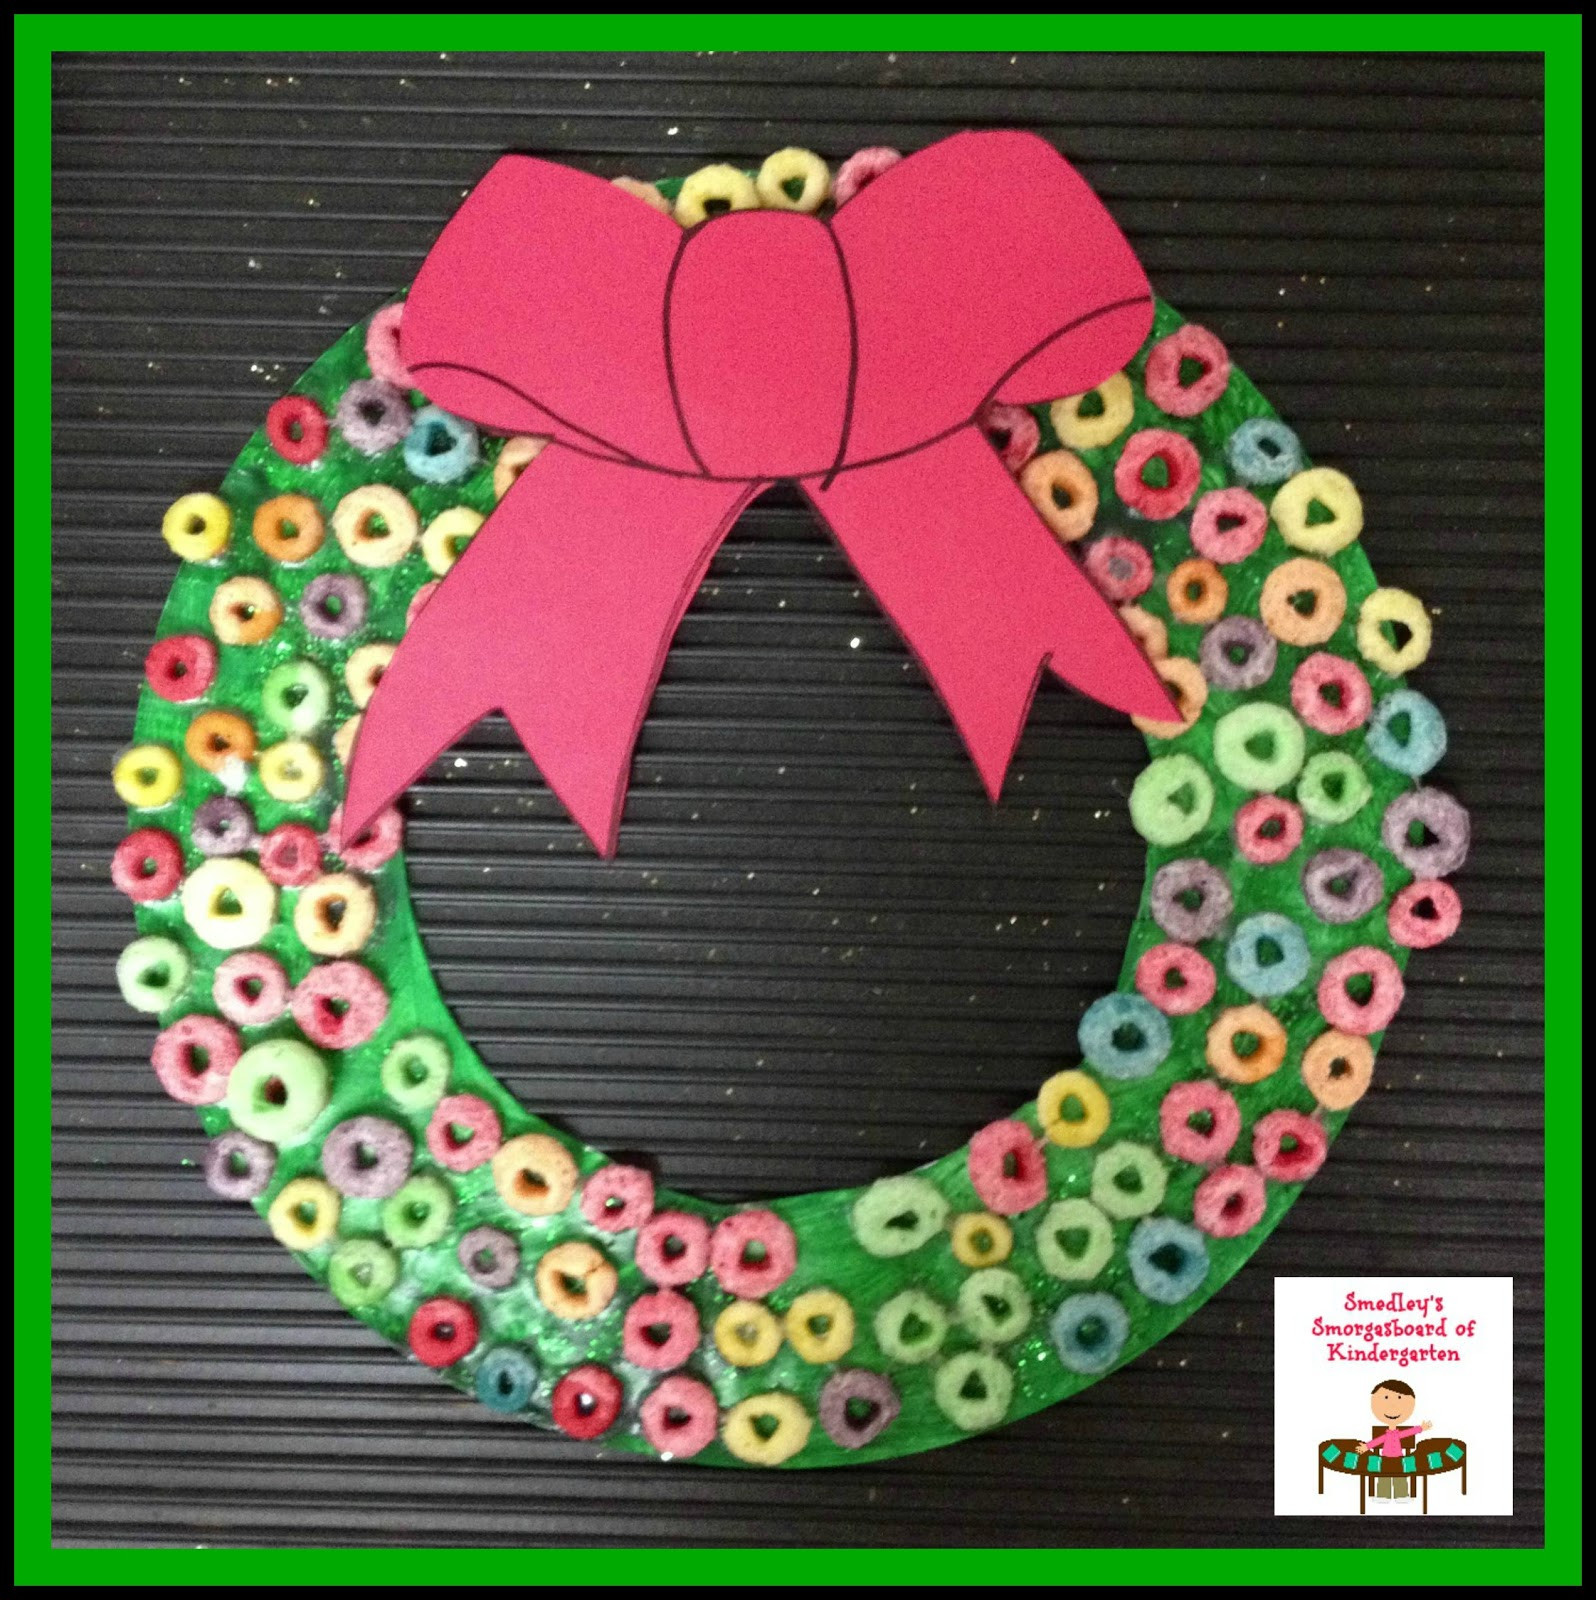 Christmas Art Projects For Toddlers
 The Kindergarten Smorgasboard Pancakes